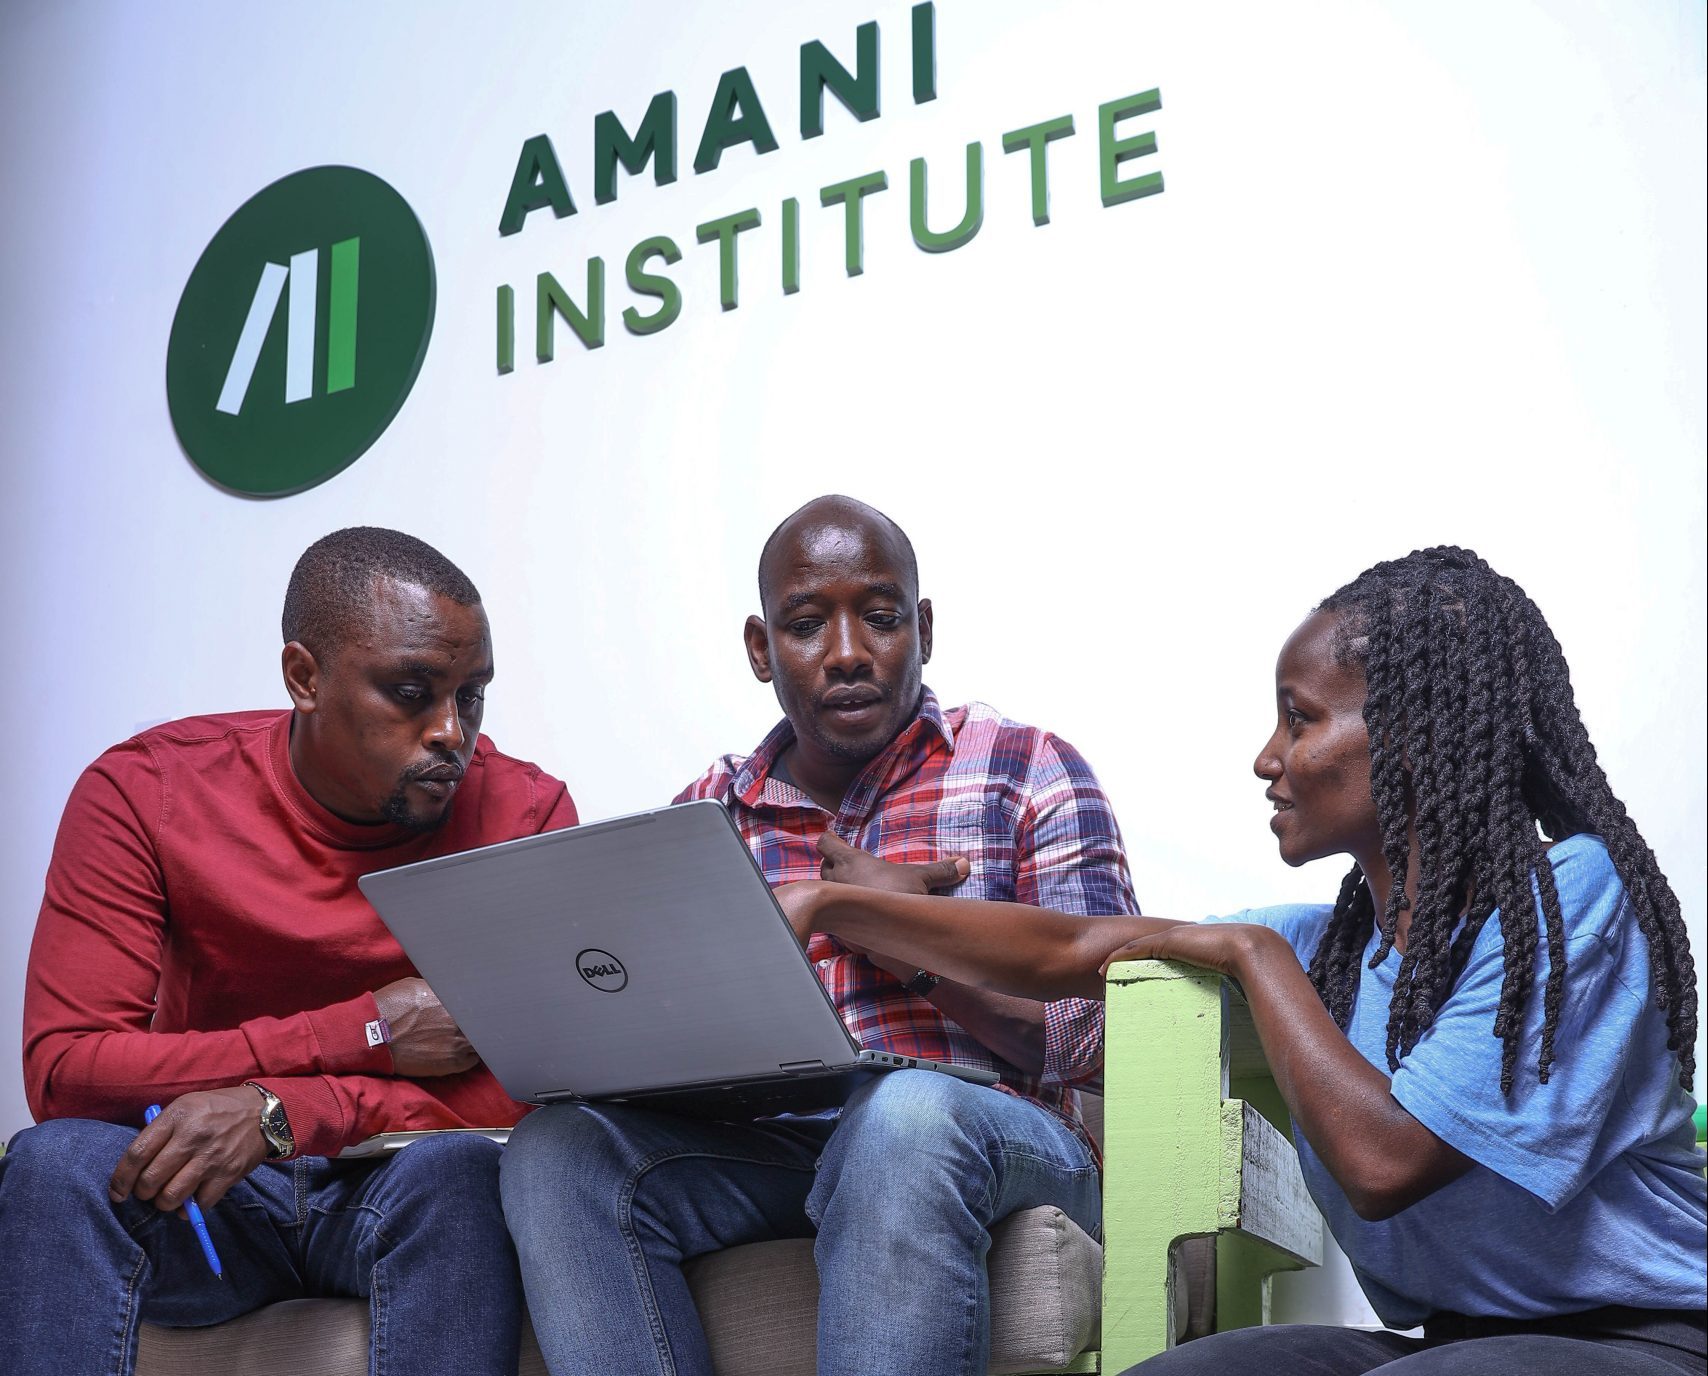 two program participants and a facilitator with the Amani Institute logo in the background